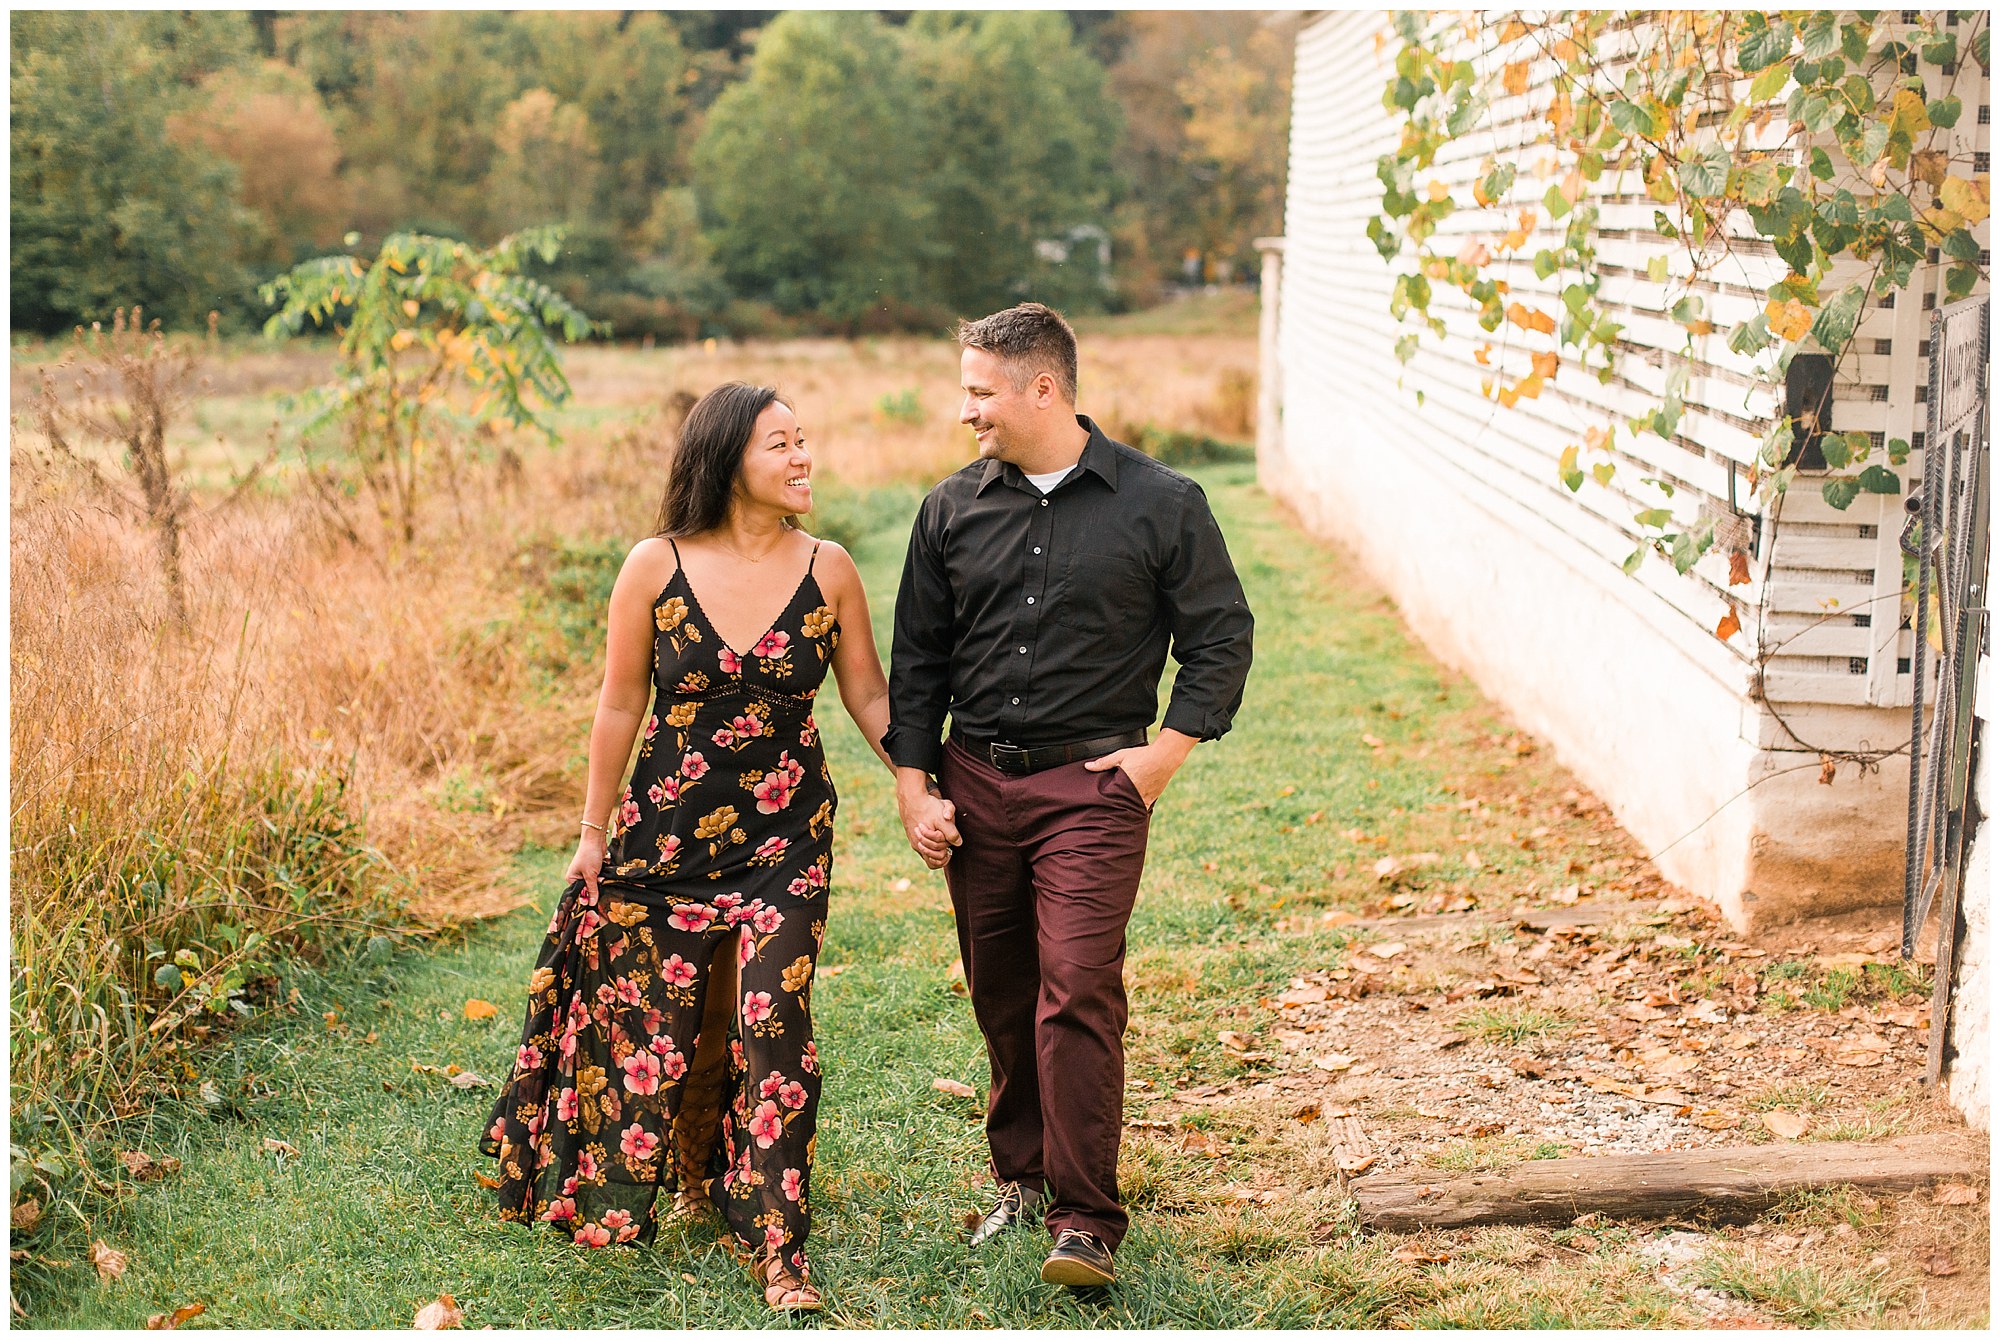 Jane And Dave's Fall Engagement at Valley Forge National Park Photos